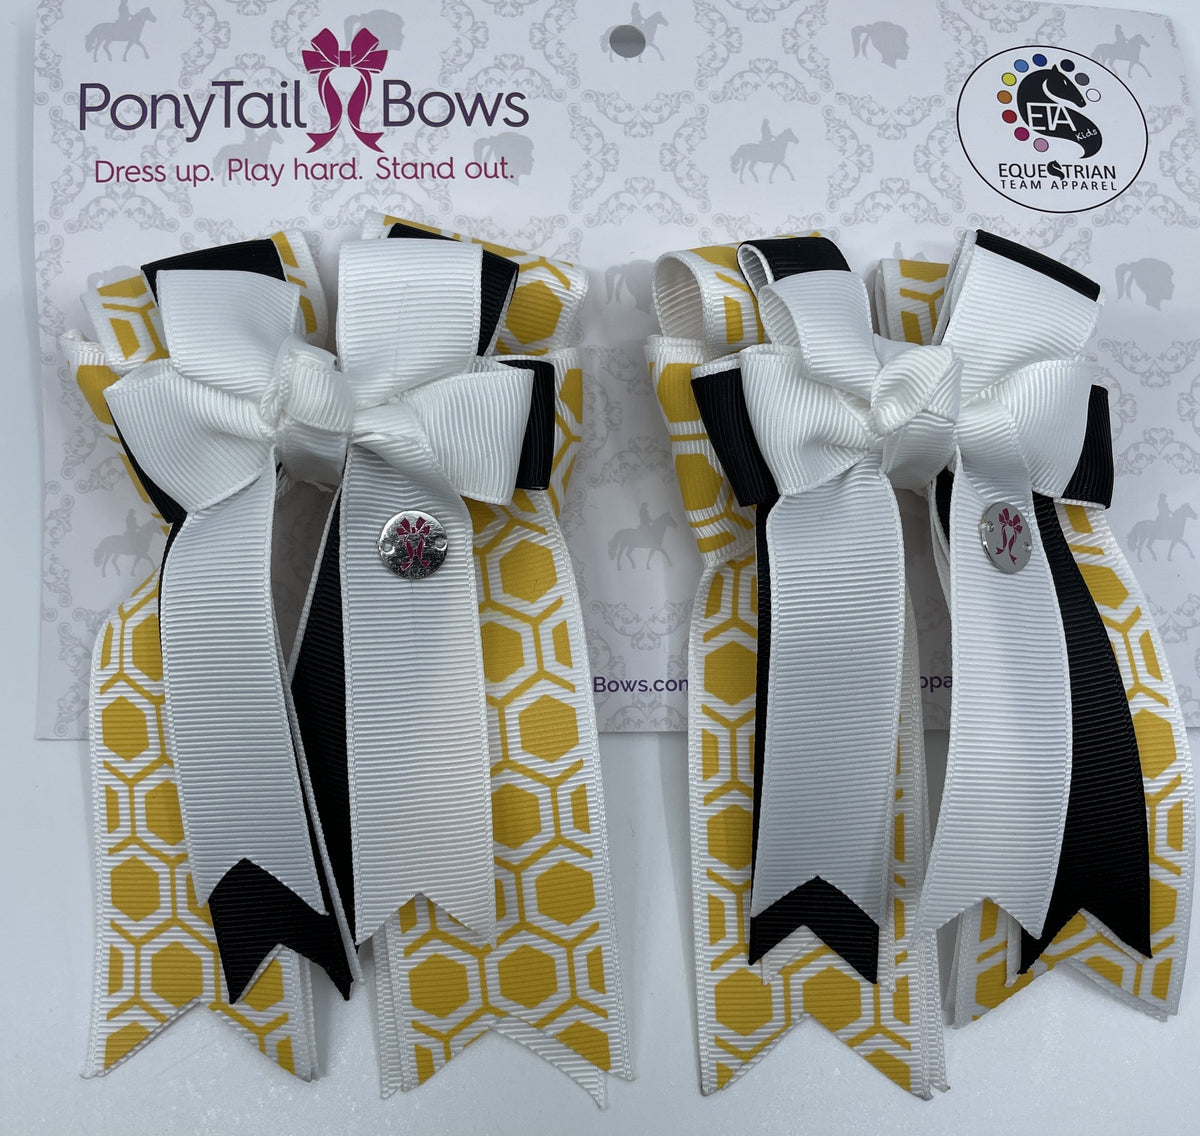 PonyTail Bows 3" Tails Honeycomb PonyTail Bows equestrian team apparel online tack store mobile tack store custom farm apparel custom show stable clothing equestrian lifestyle horse show clothing riding clothes PonyTail Bows | Equestrian Hair Accessories horses equestrian tack store